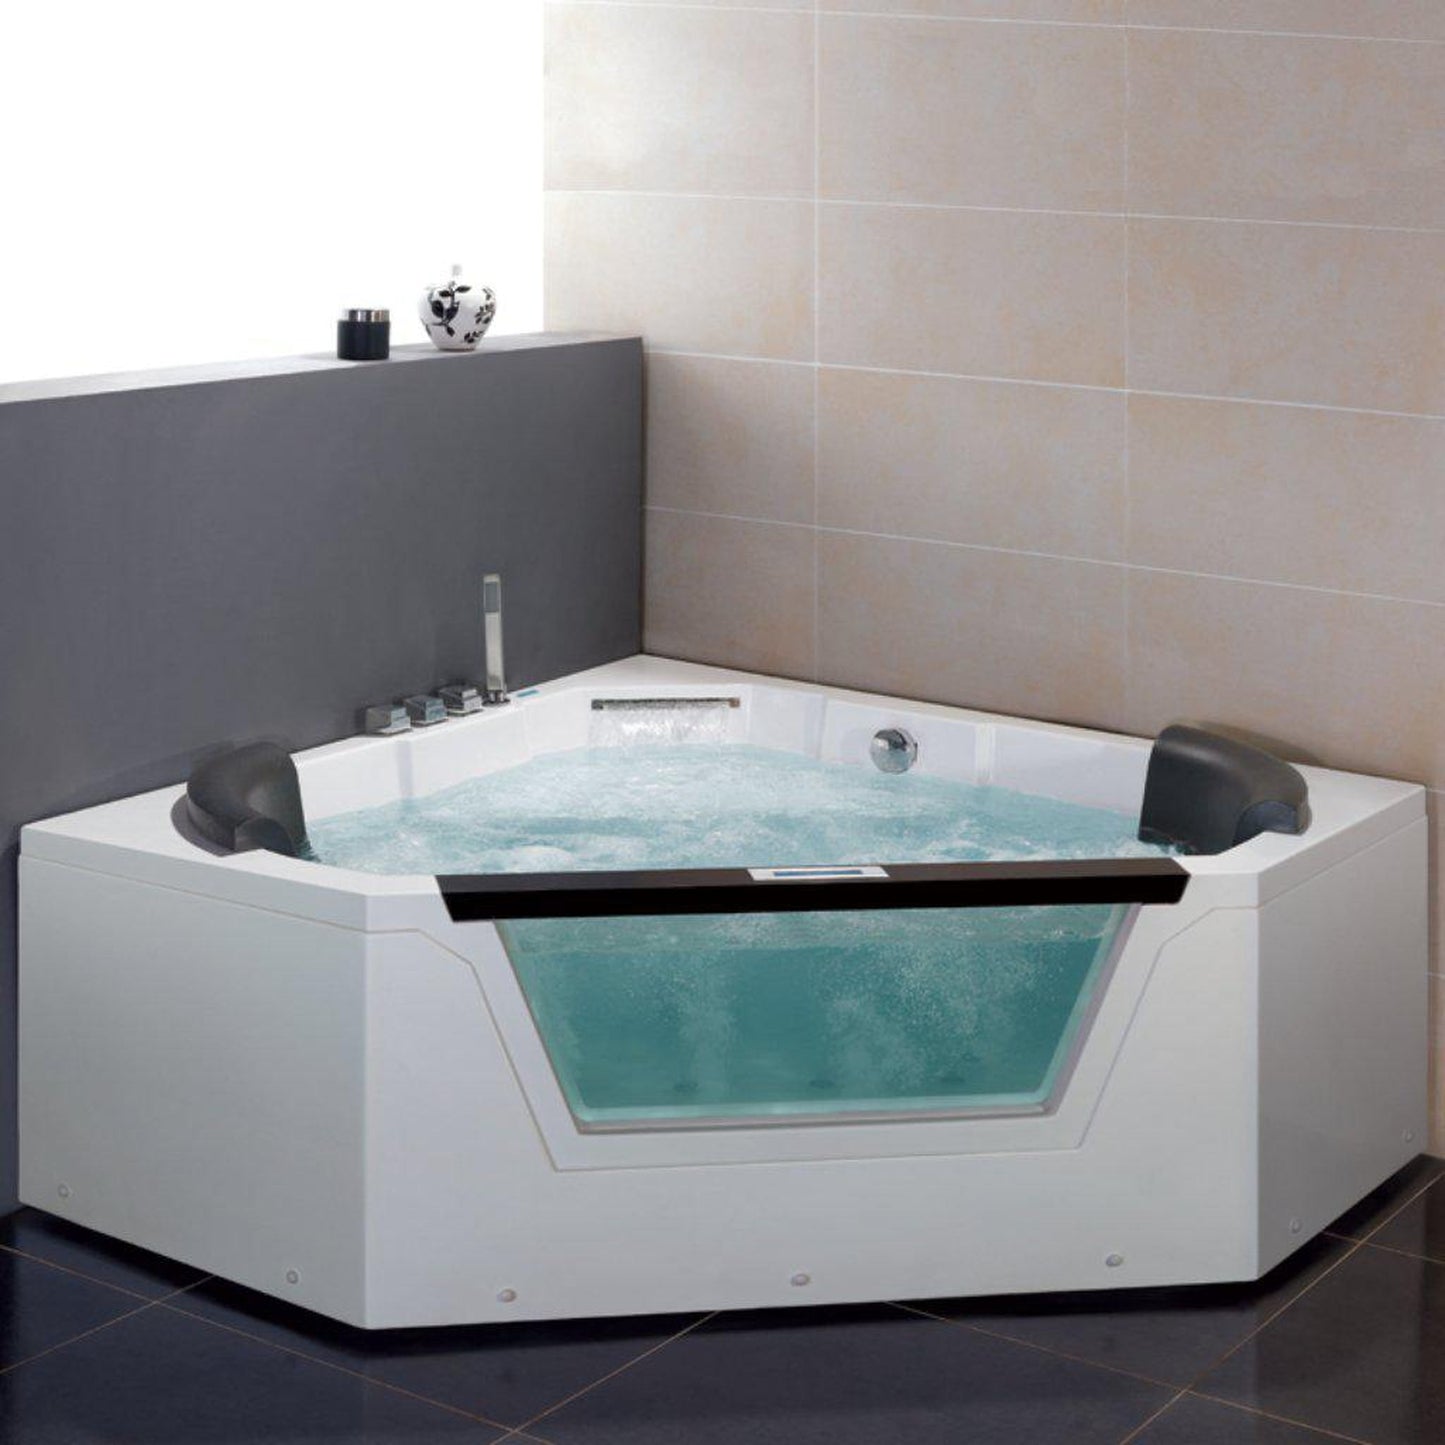 Platinum 59" x 59" x 24" Two-Person Corner Whirlpool Bathtub With Waterfall Spout 22 Hydro Massage Jets & Handheld Shower